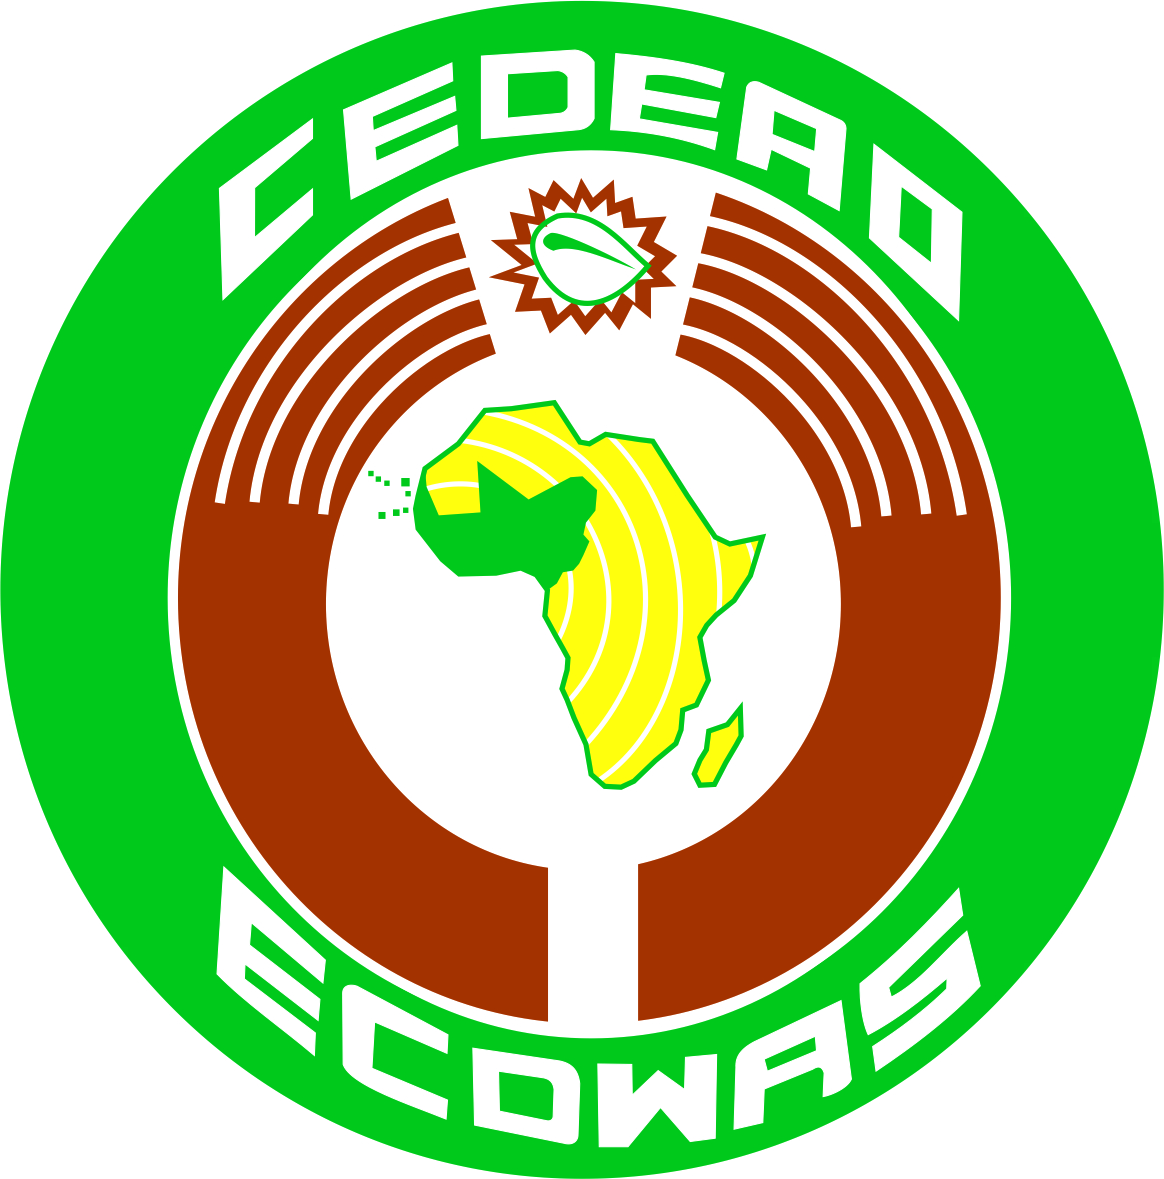 Exchanges Between Economic Community of West African States (ECOWAS) and The European Union to Deepen Their Strategic Partnership